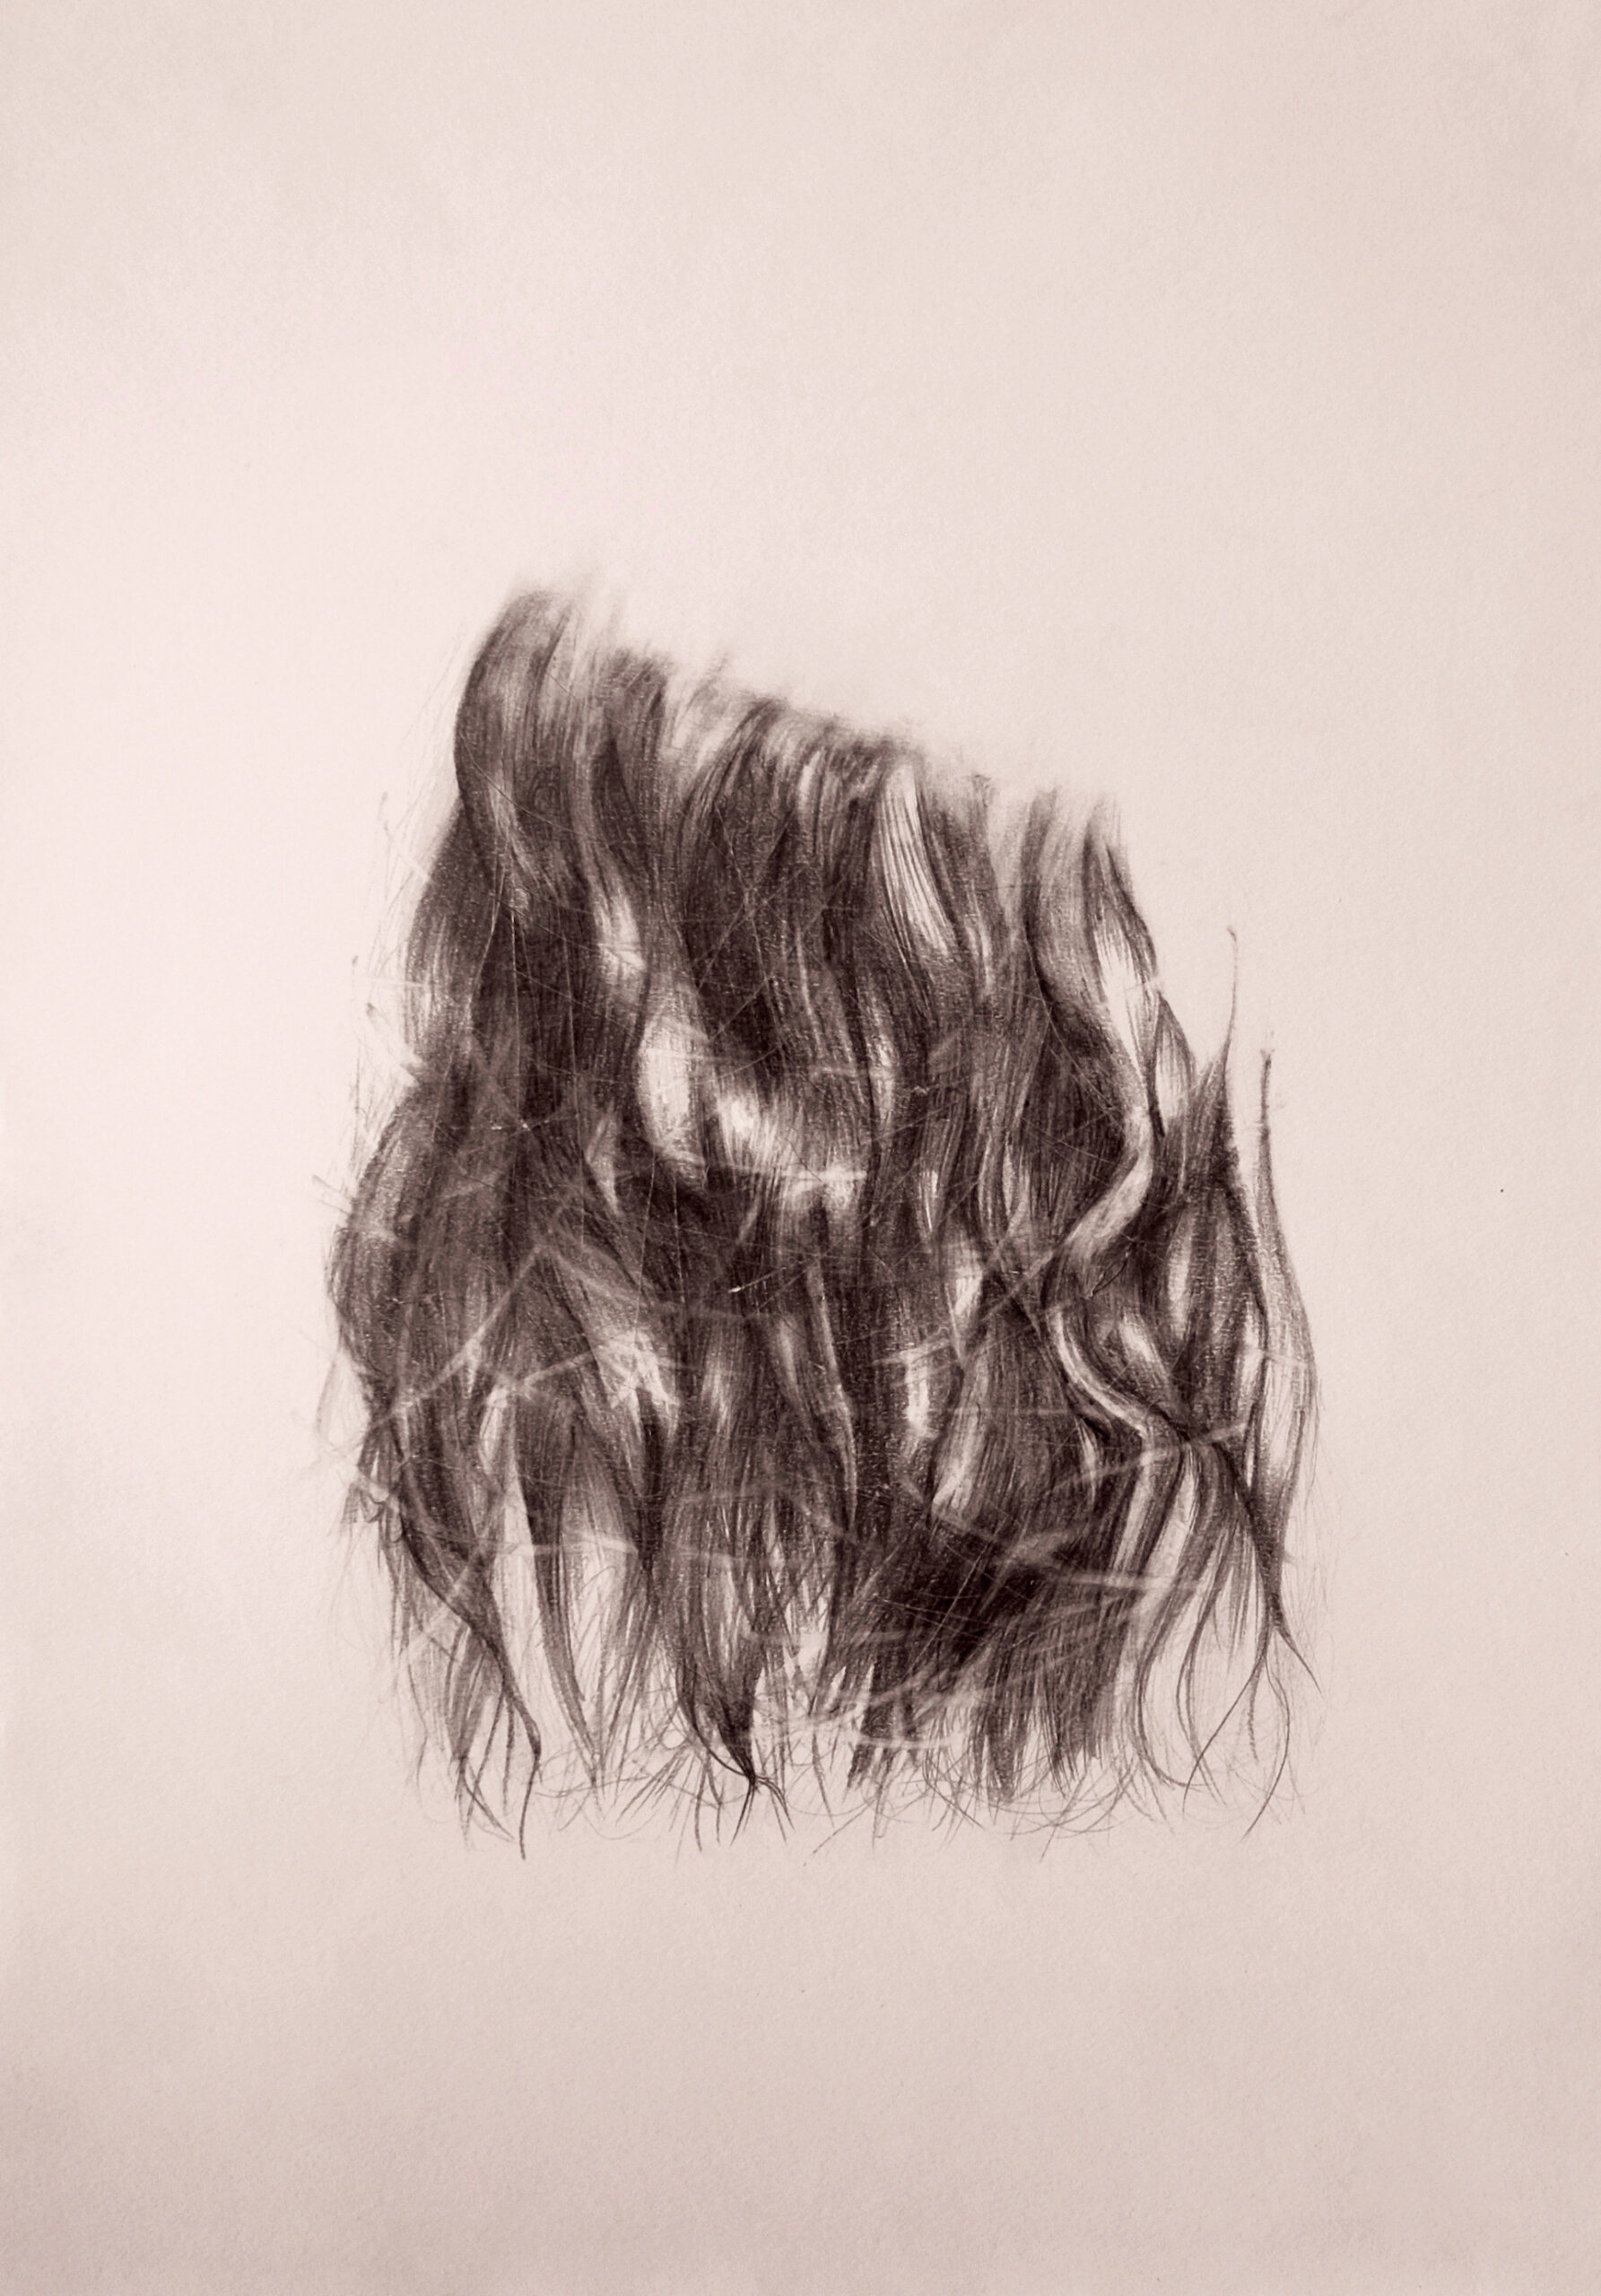 "Floating Hair" by Samia Soubra